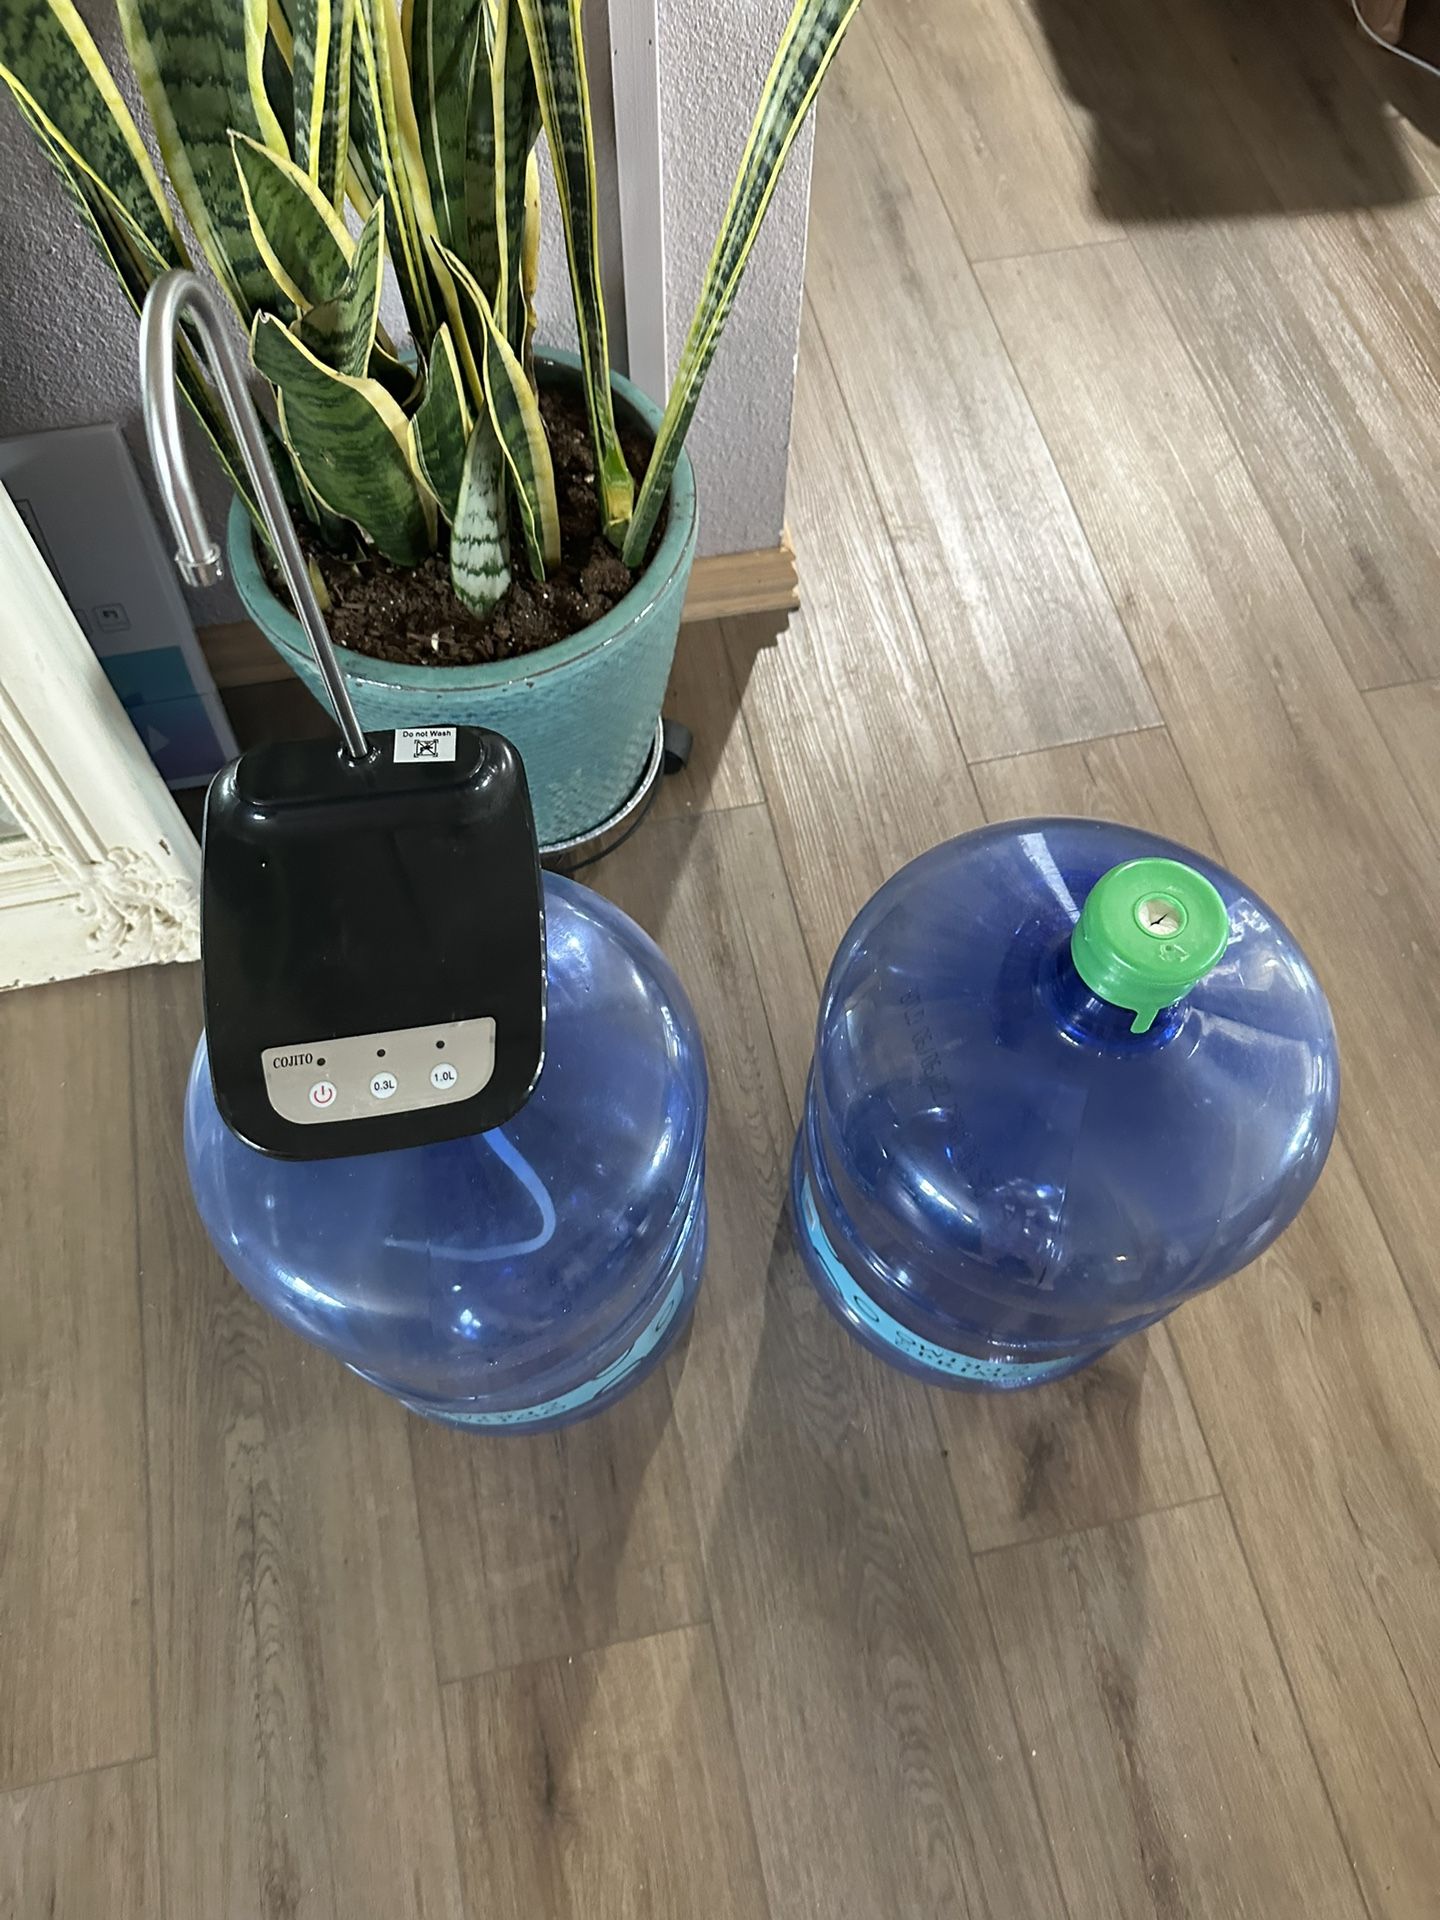 2 -Water Jugs (5 gallons) With Electric fountain